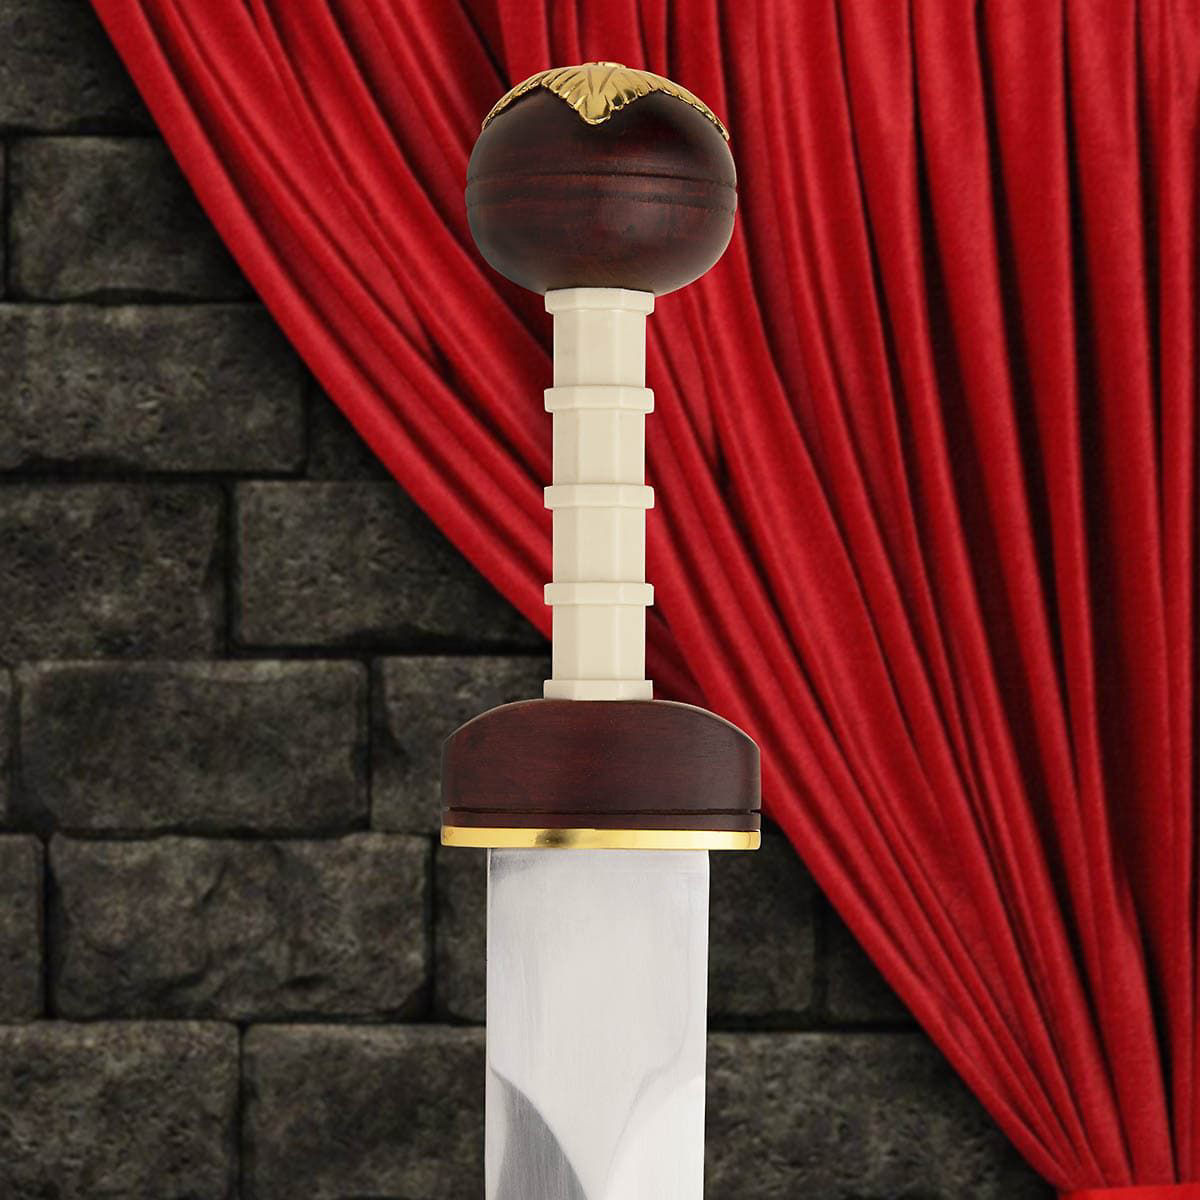 Spiculus Gladius has a  bone grip and stained hardwood pommel capped with gold plated leaf overlay, made by Windlass